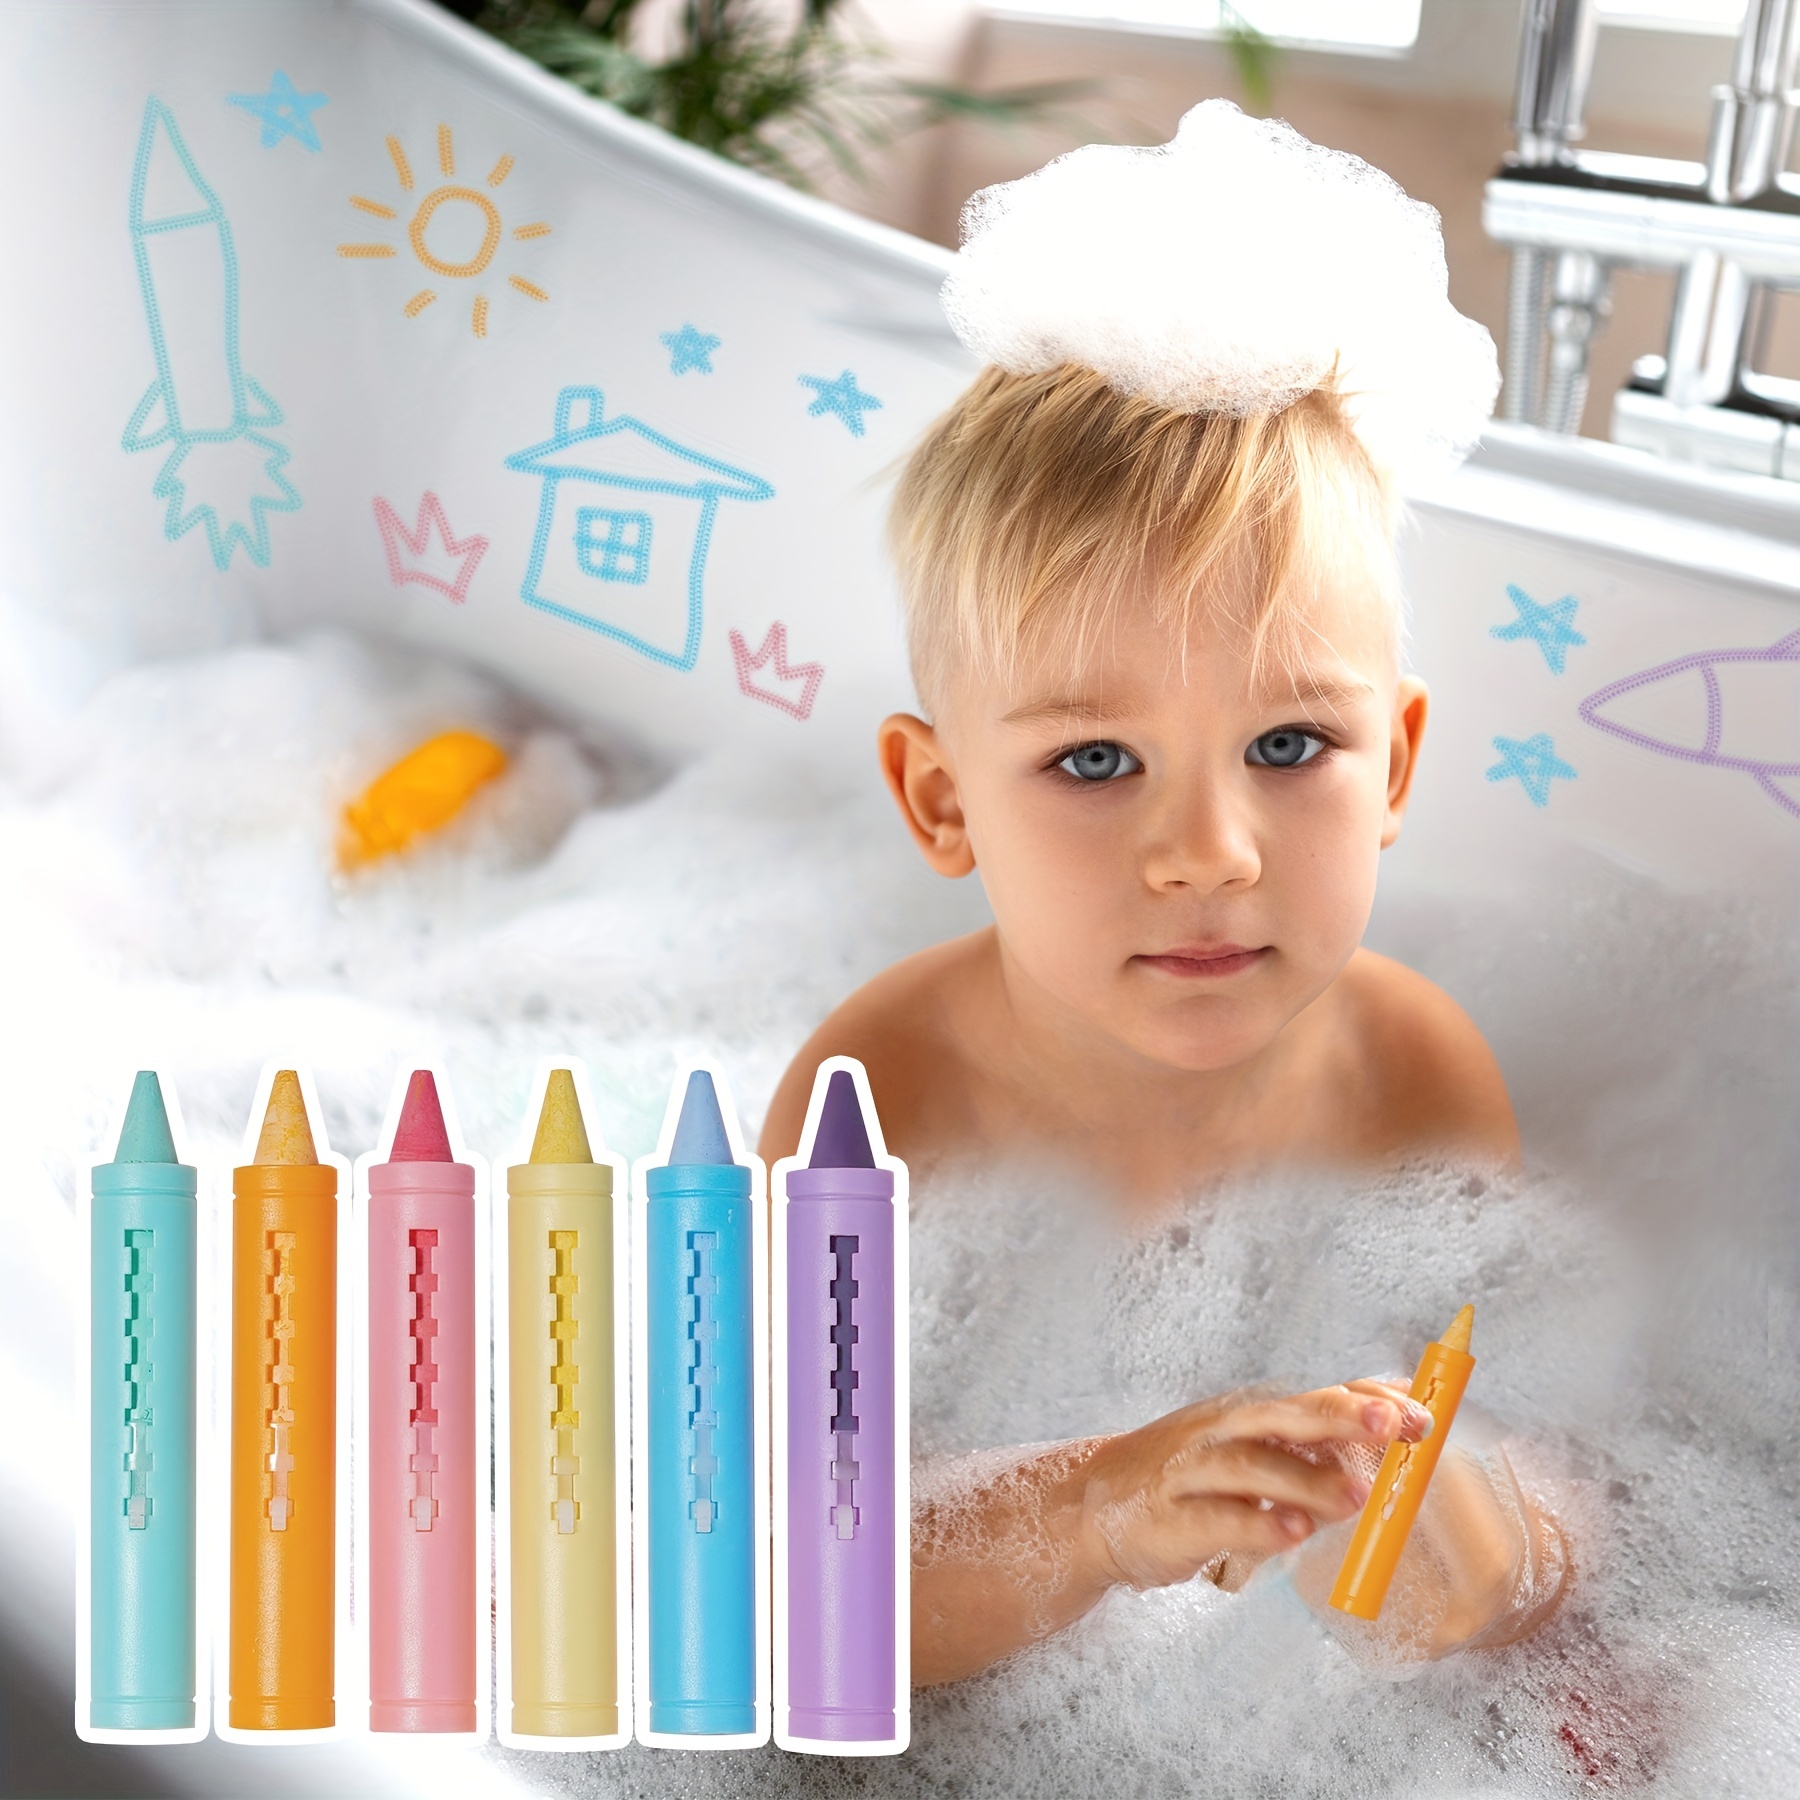 6pcs Bath Crayons Set, Bathtub Crayons Washable Easy Clean Bathtime Crayons,  Colorful Bathtub Markers Toys, Shower Crayons Bath Paint , Face Body Makeup  Party Putter Crayon, For Toddlers Kids